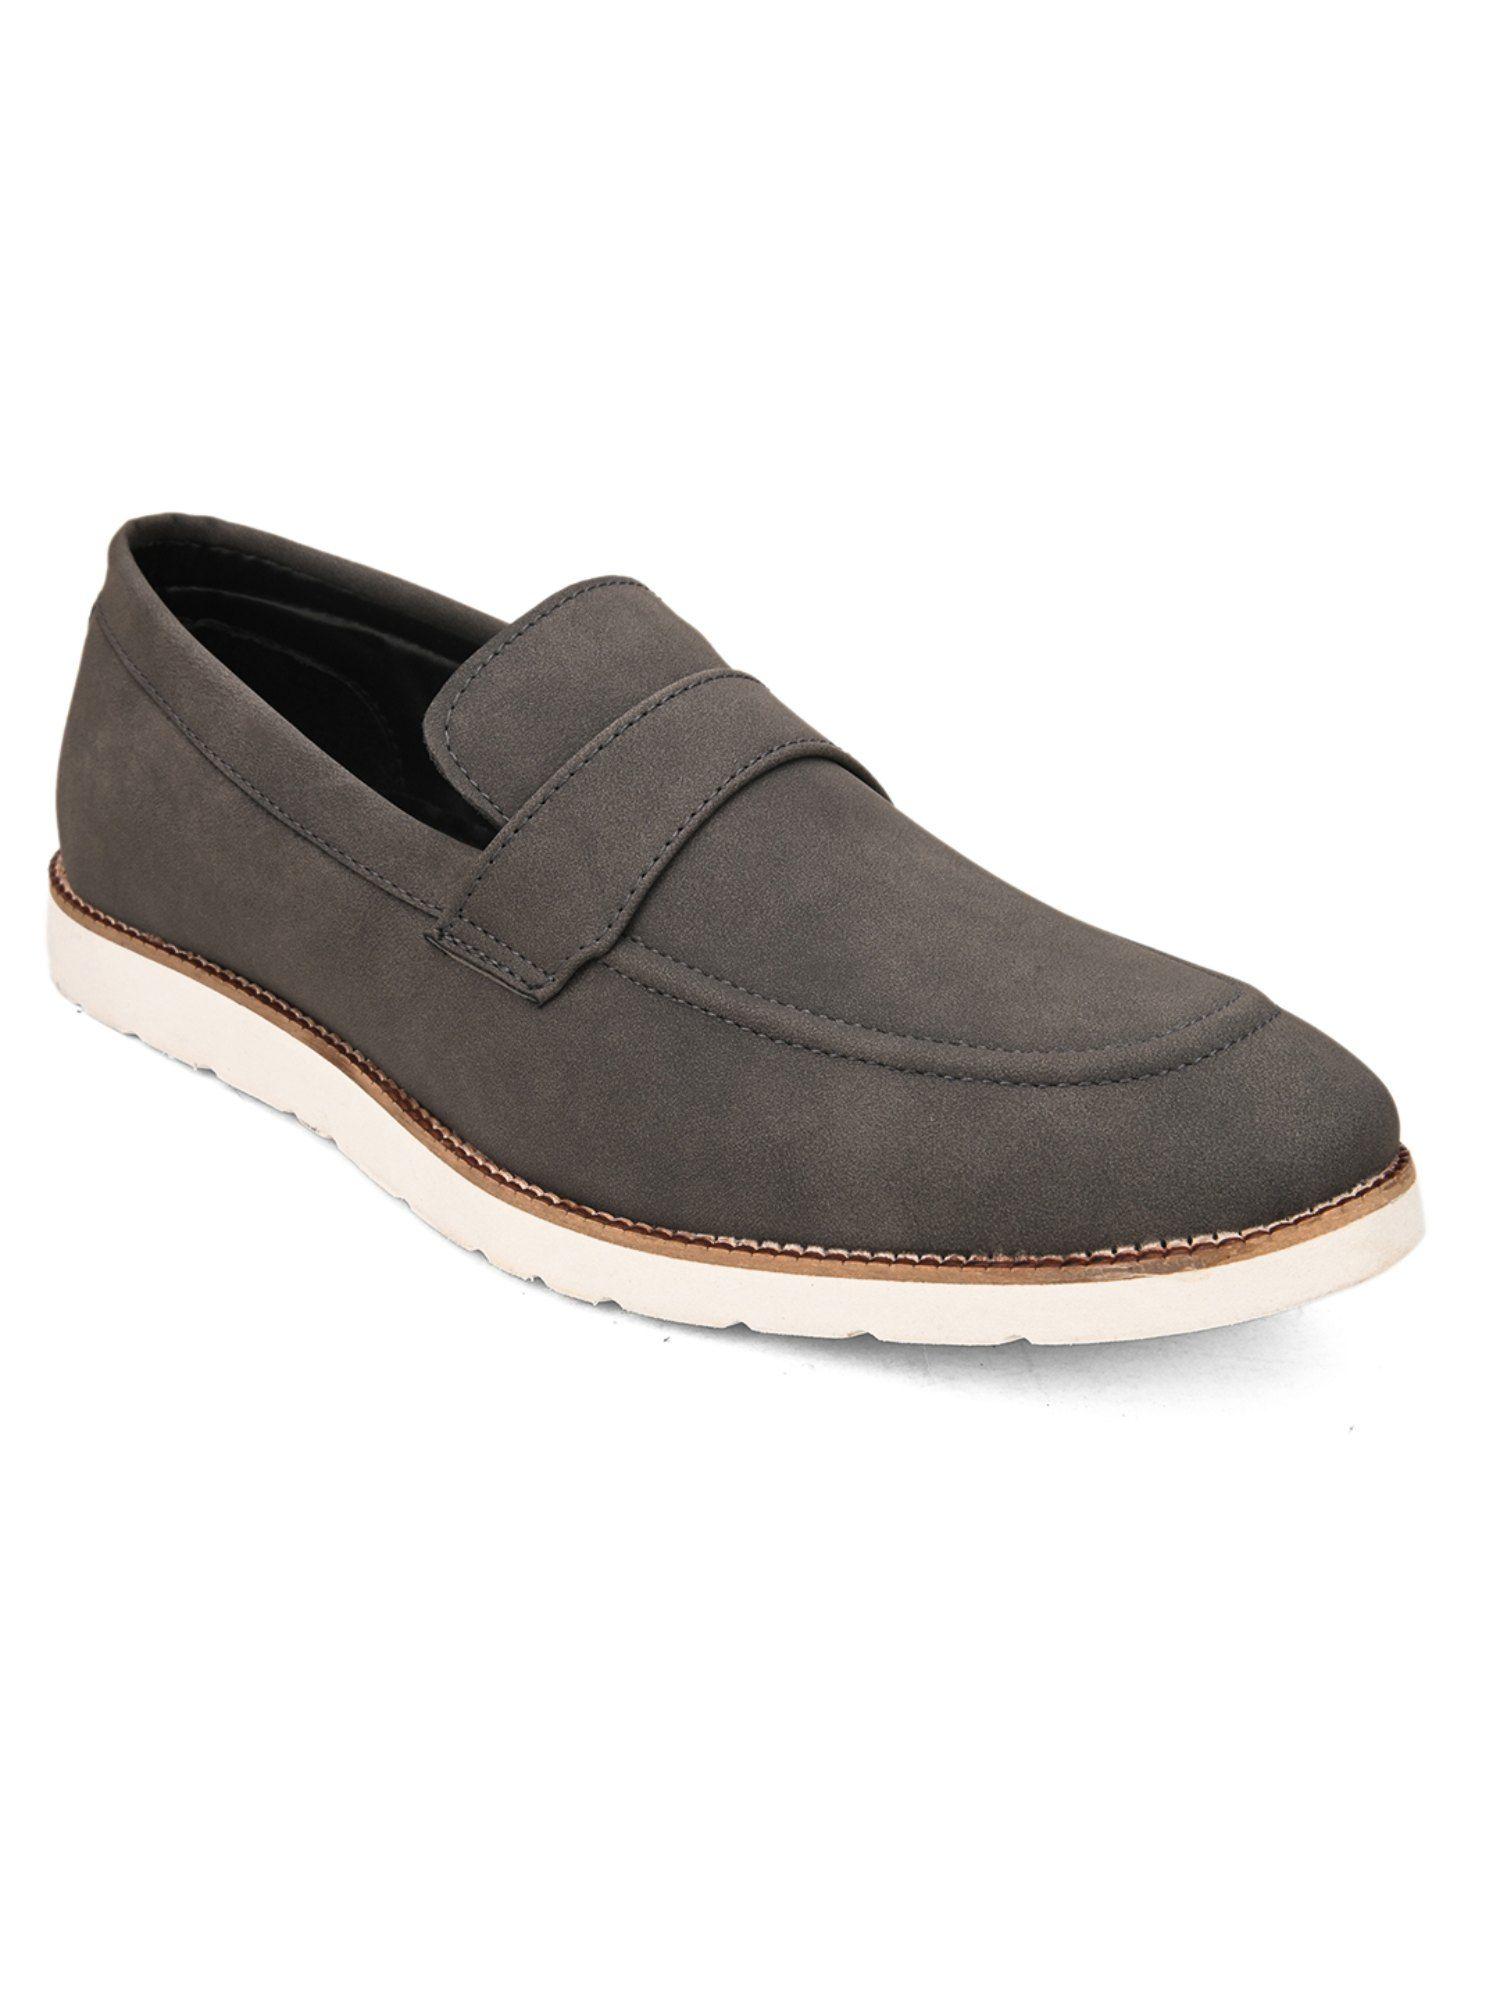 grey casual synthetic slip-ons shoes for men